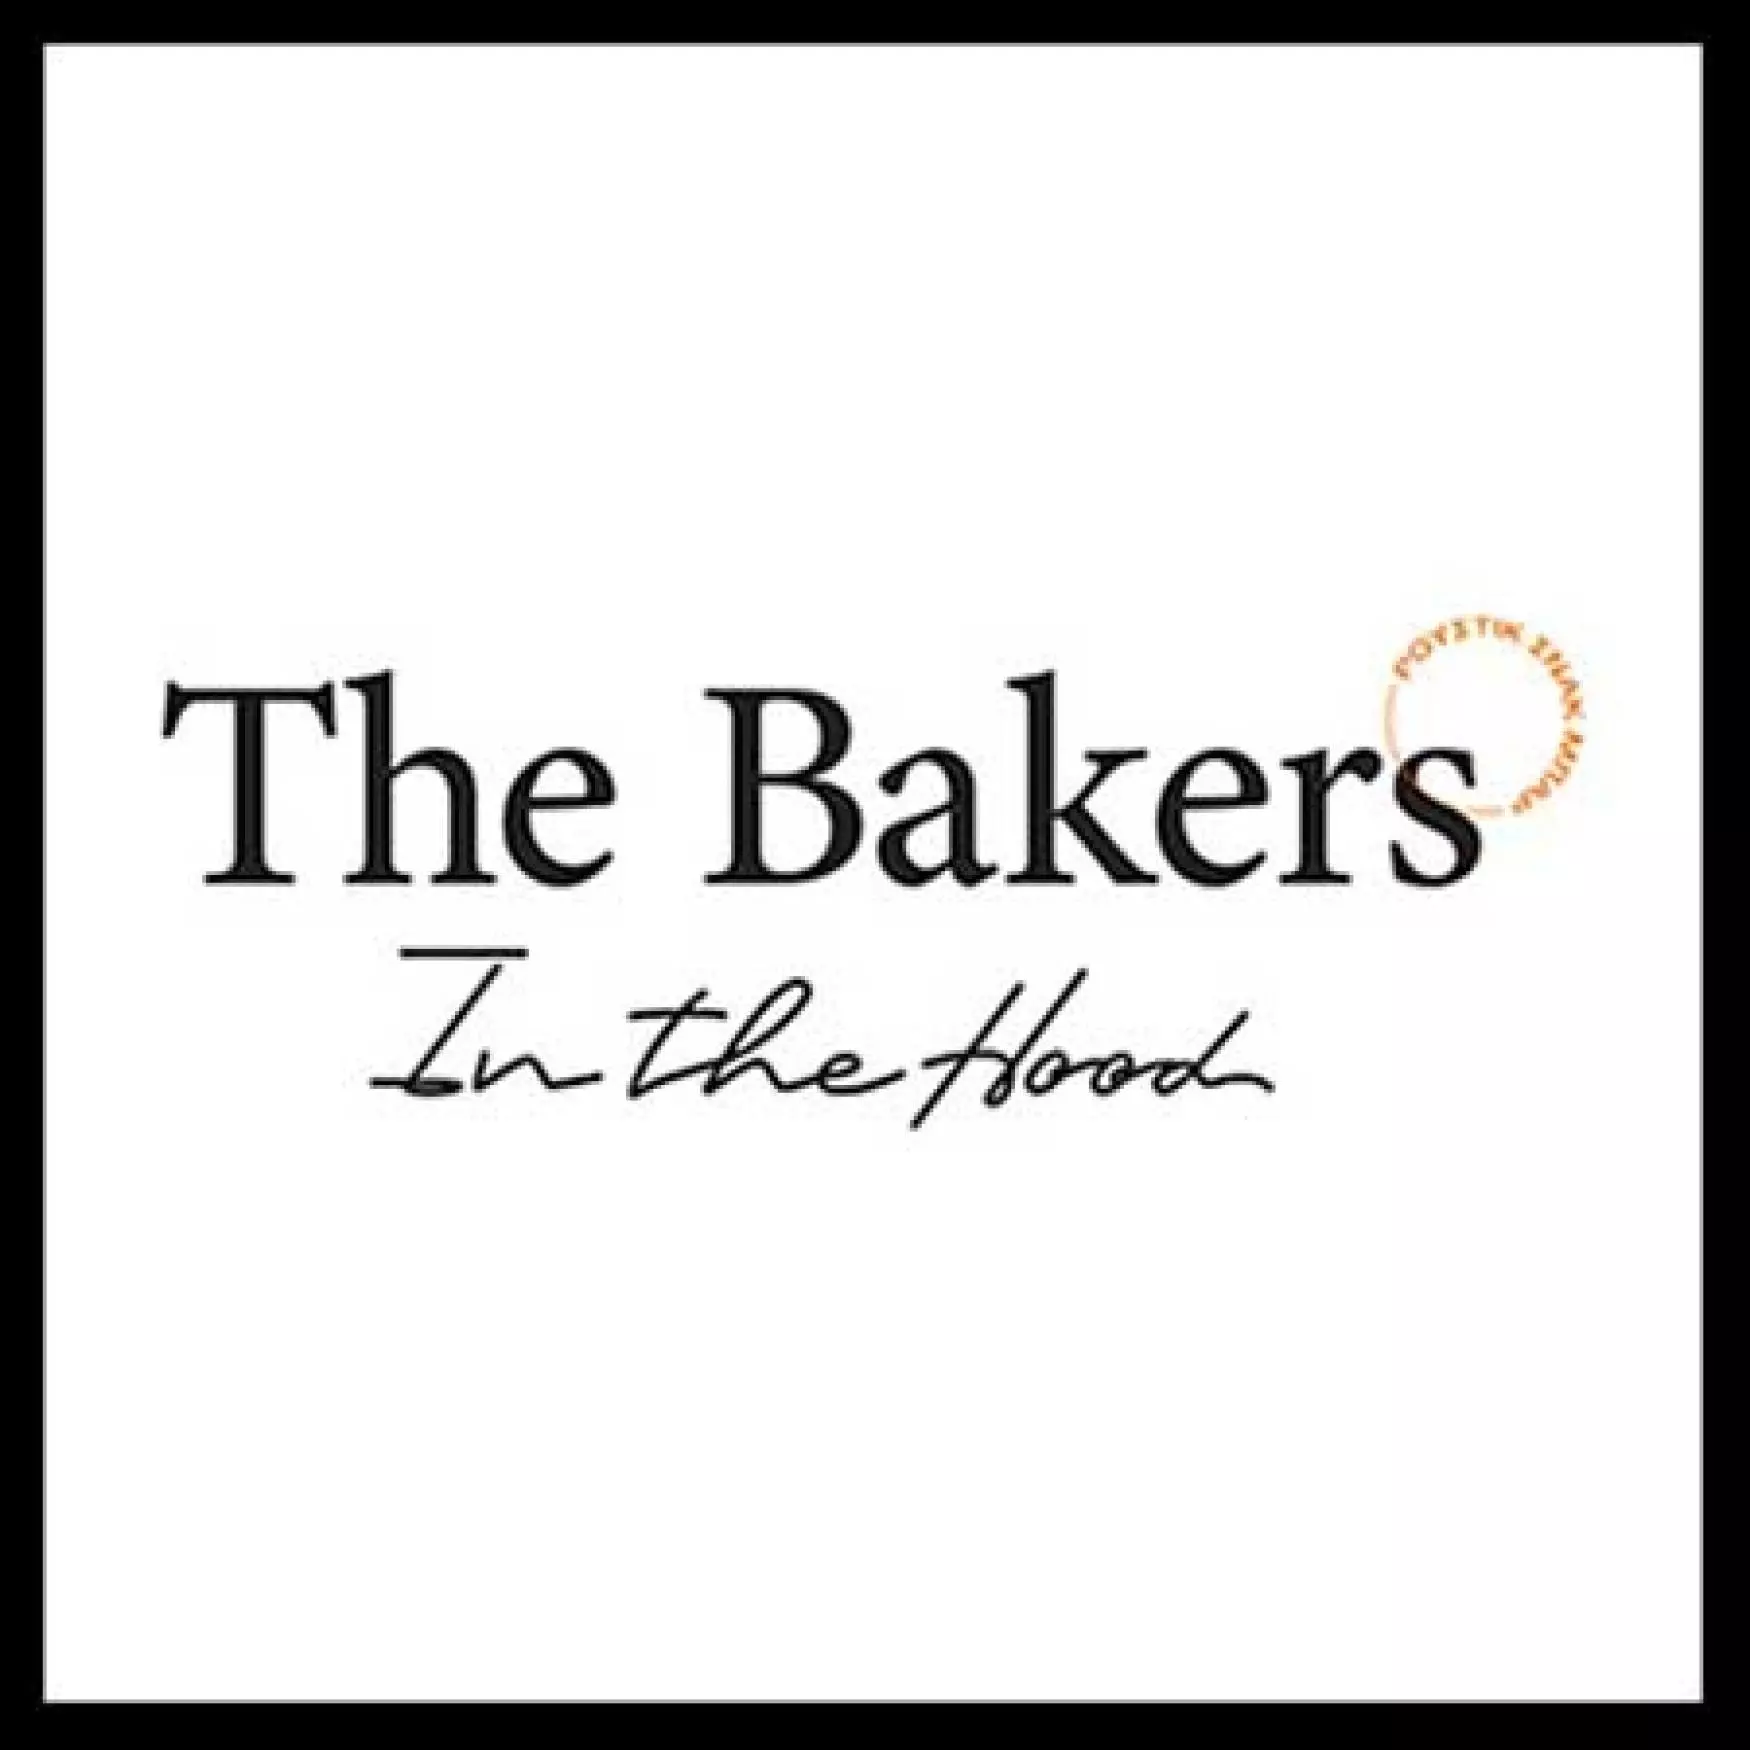 THE BAKERS IN THE HOOD